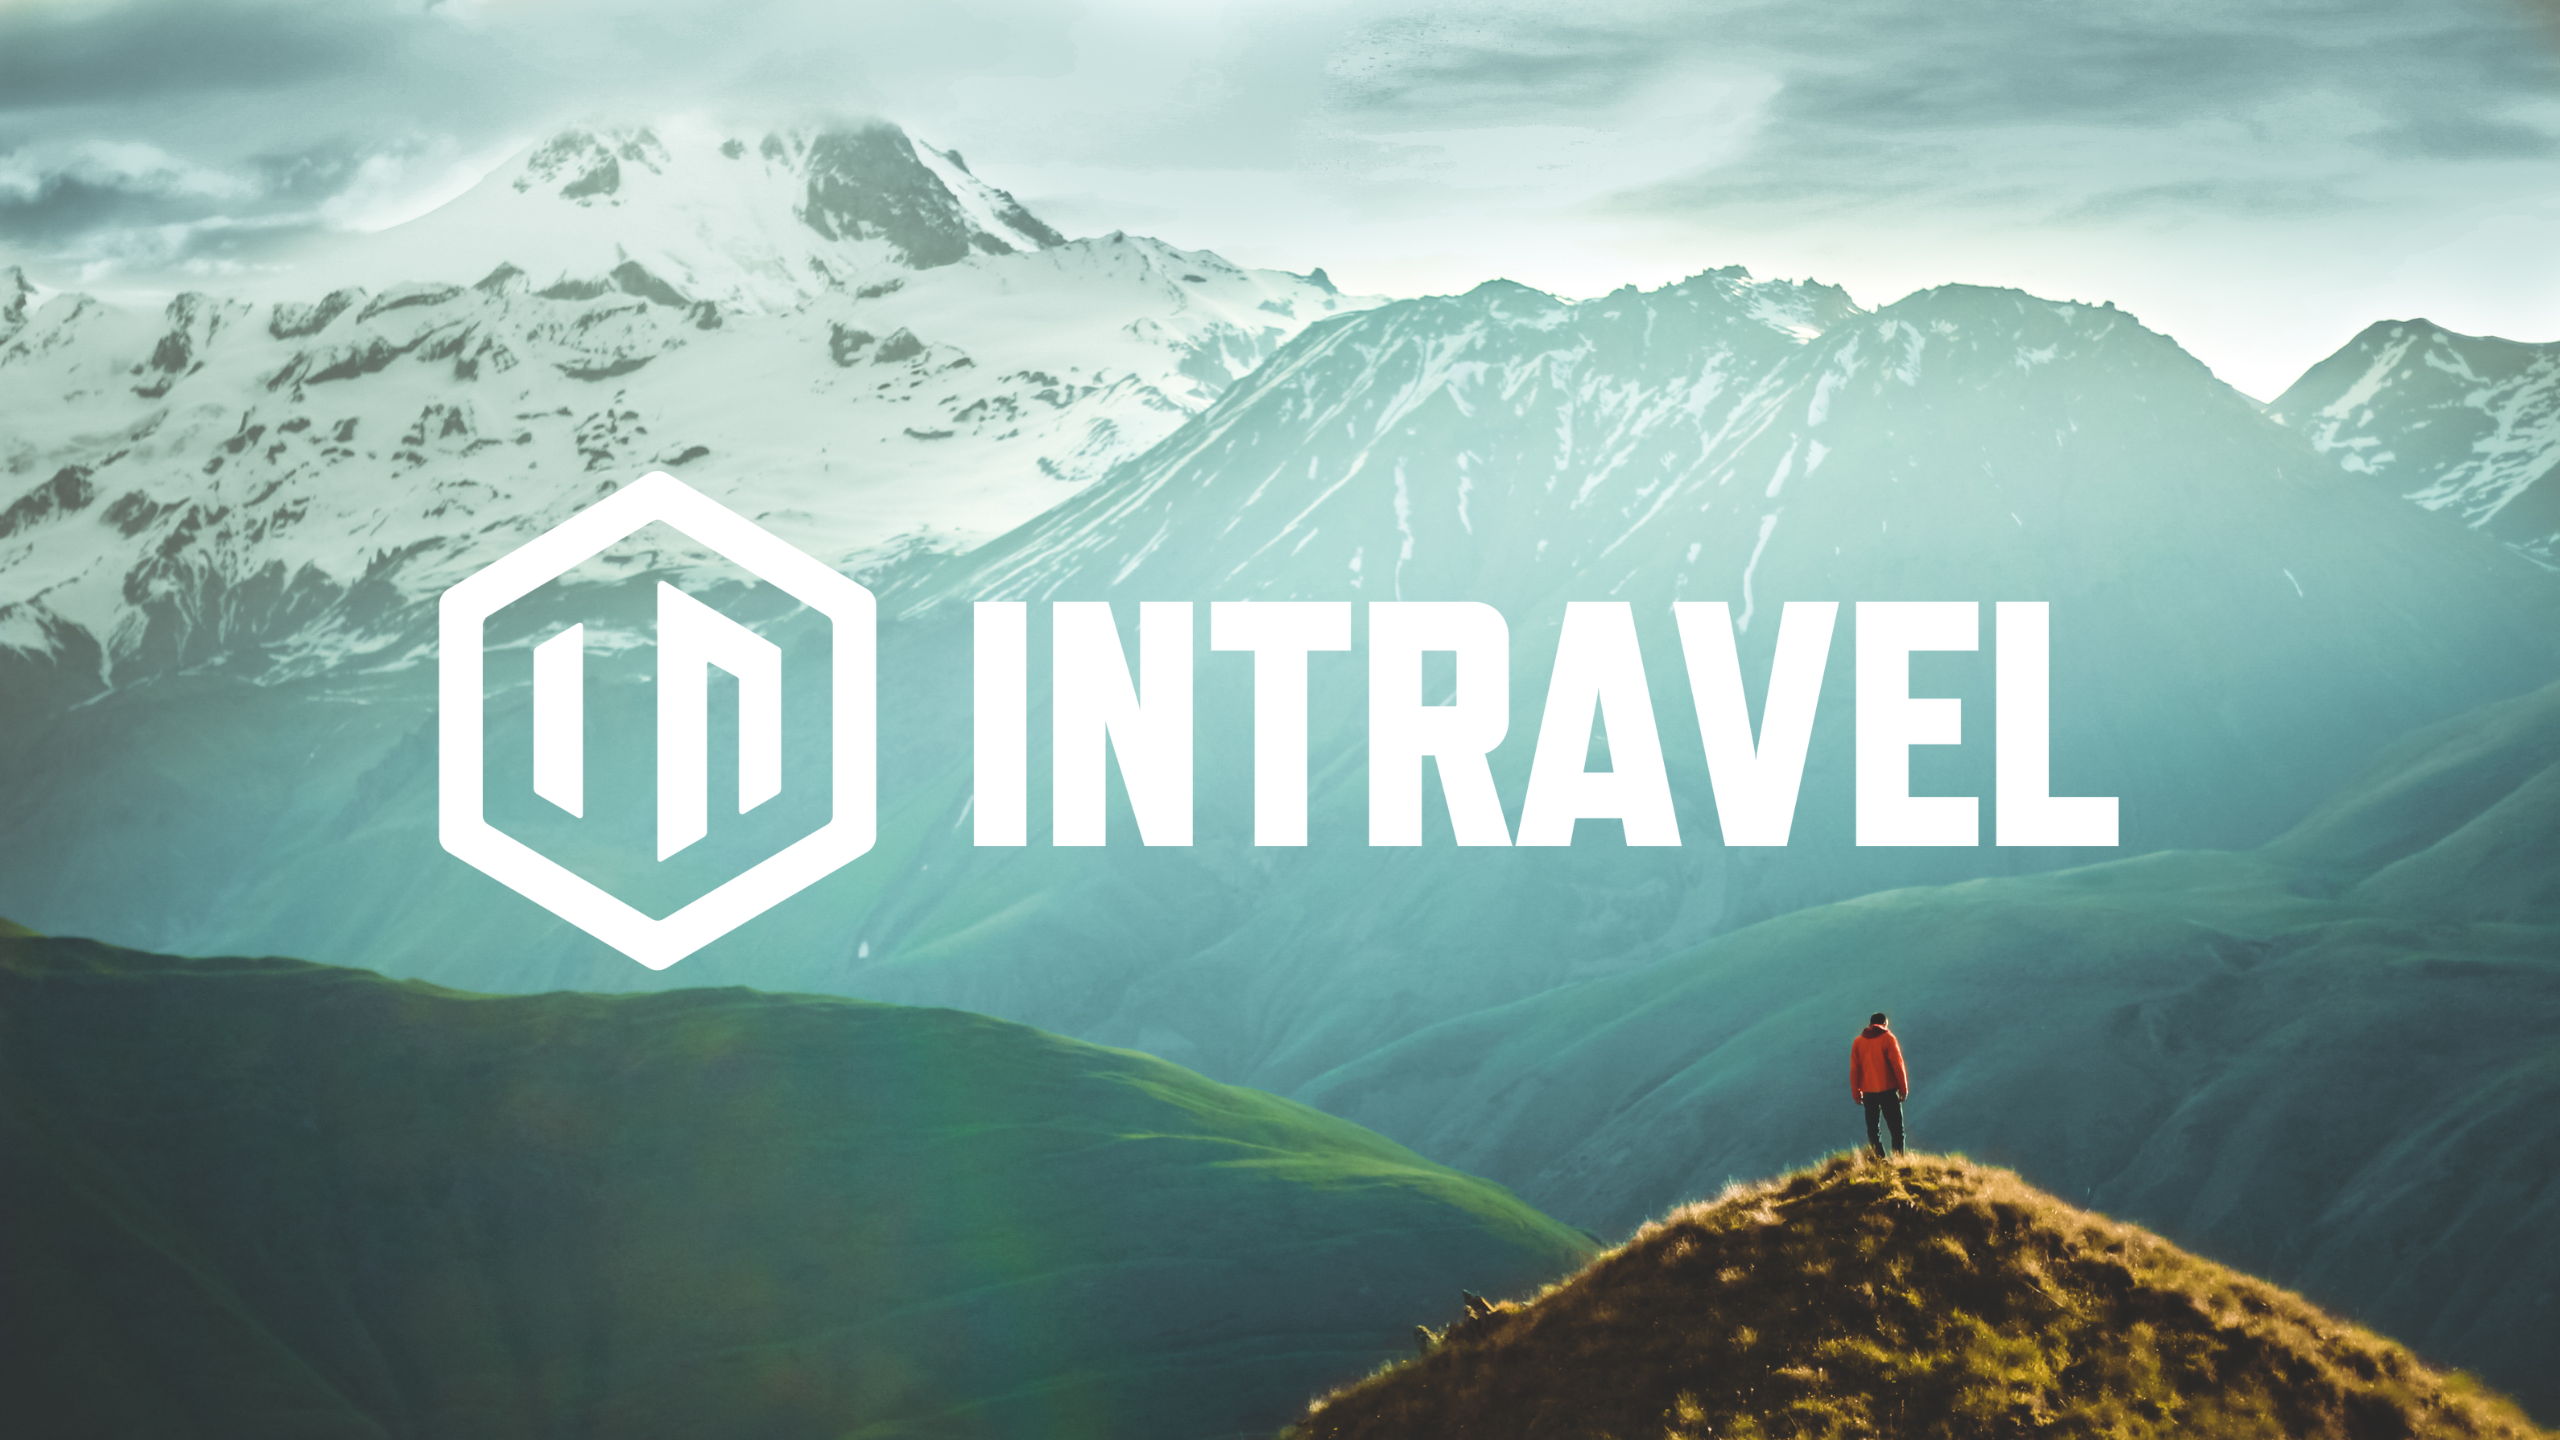 INTRAVEL channel from INSIGHT TV